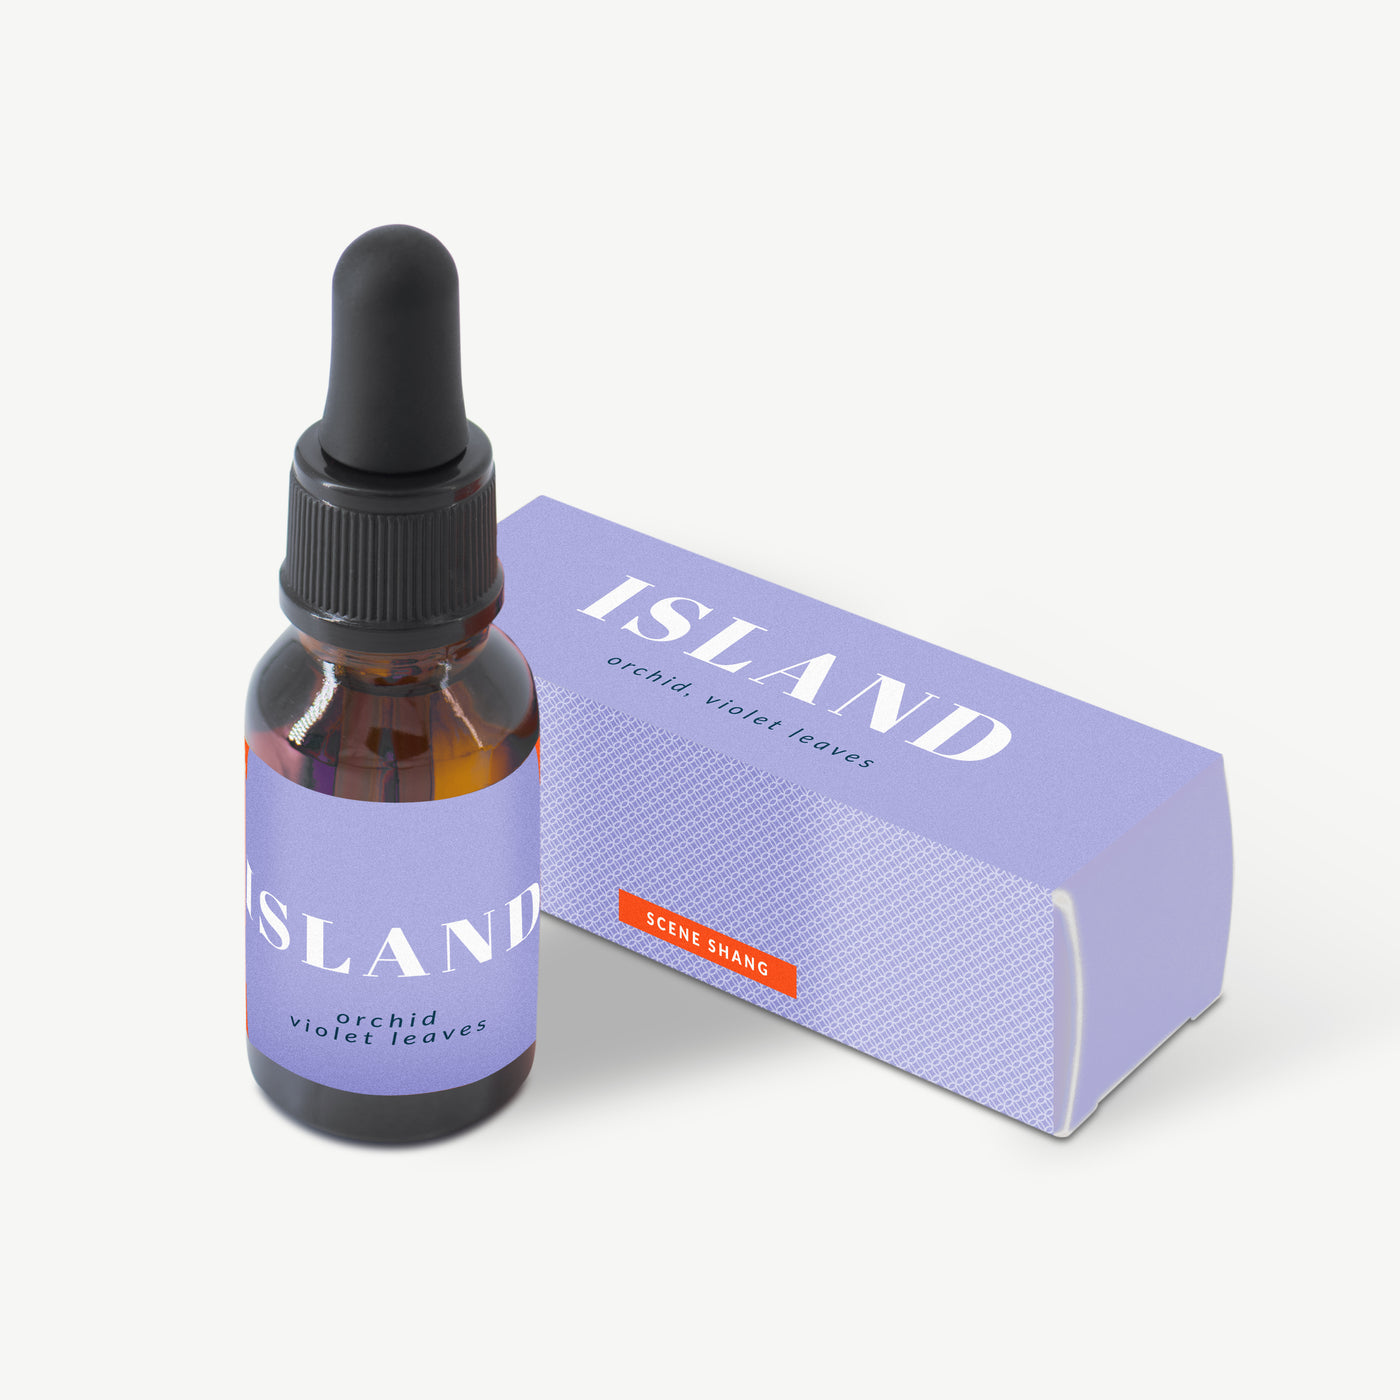 ISLAND Diffuser Oil (Orchid, Violet Leaves)